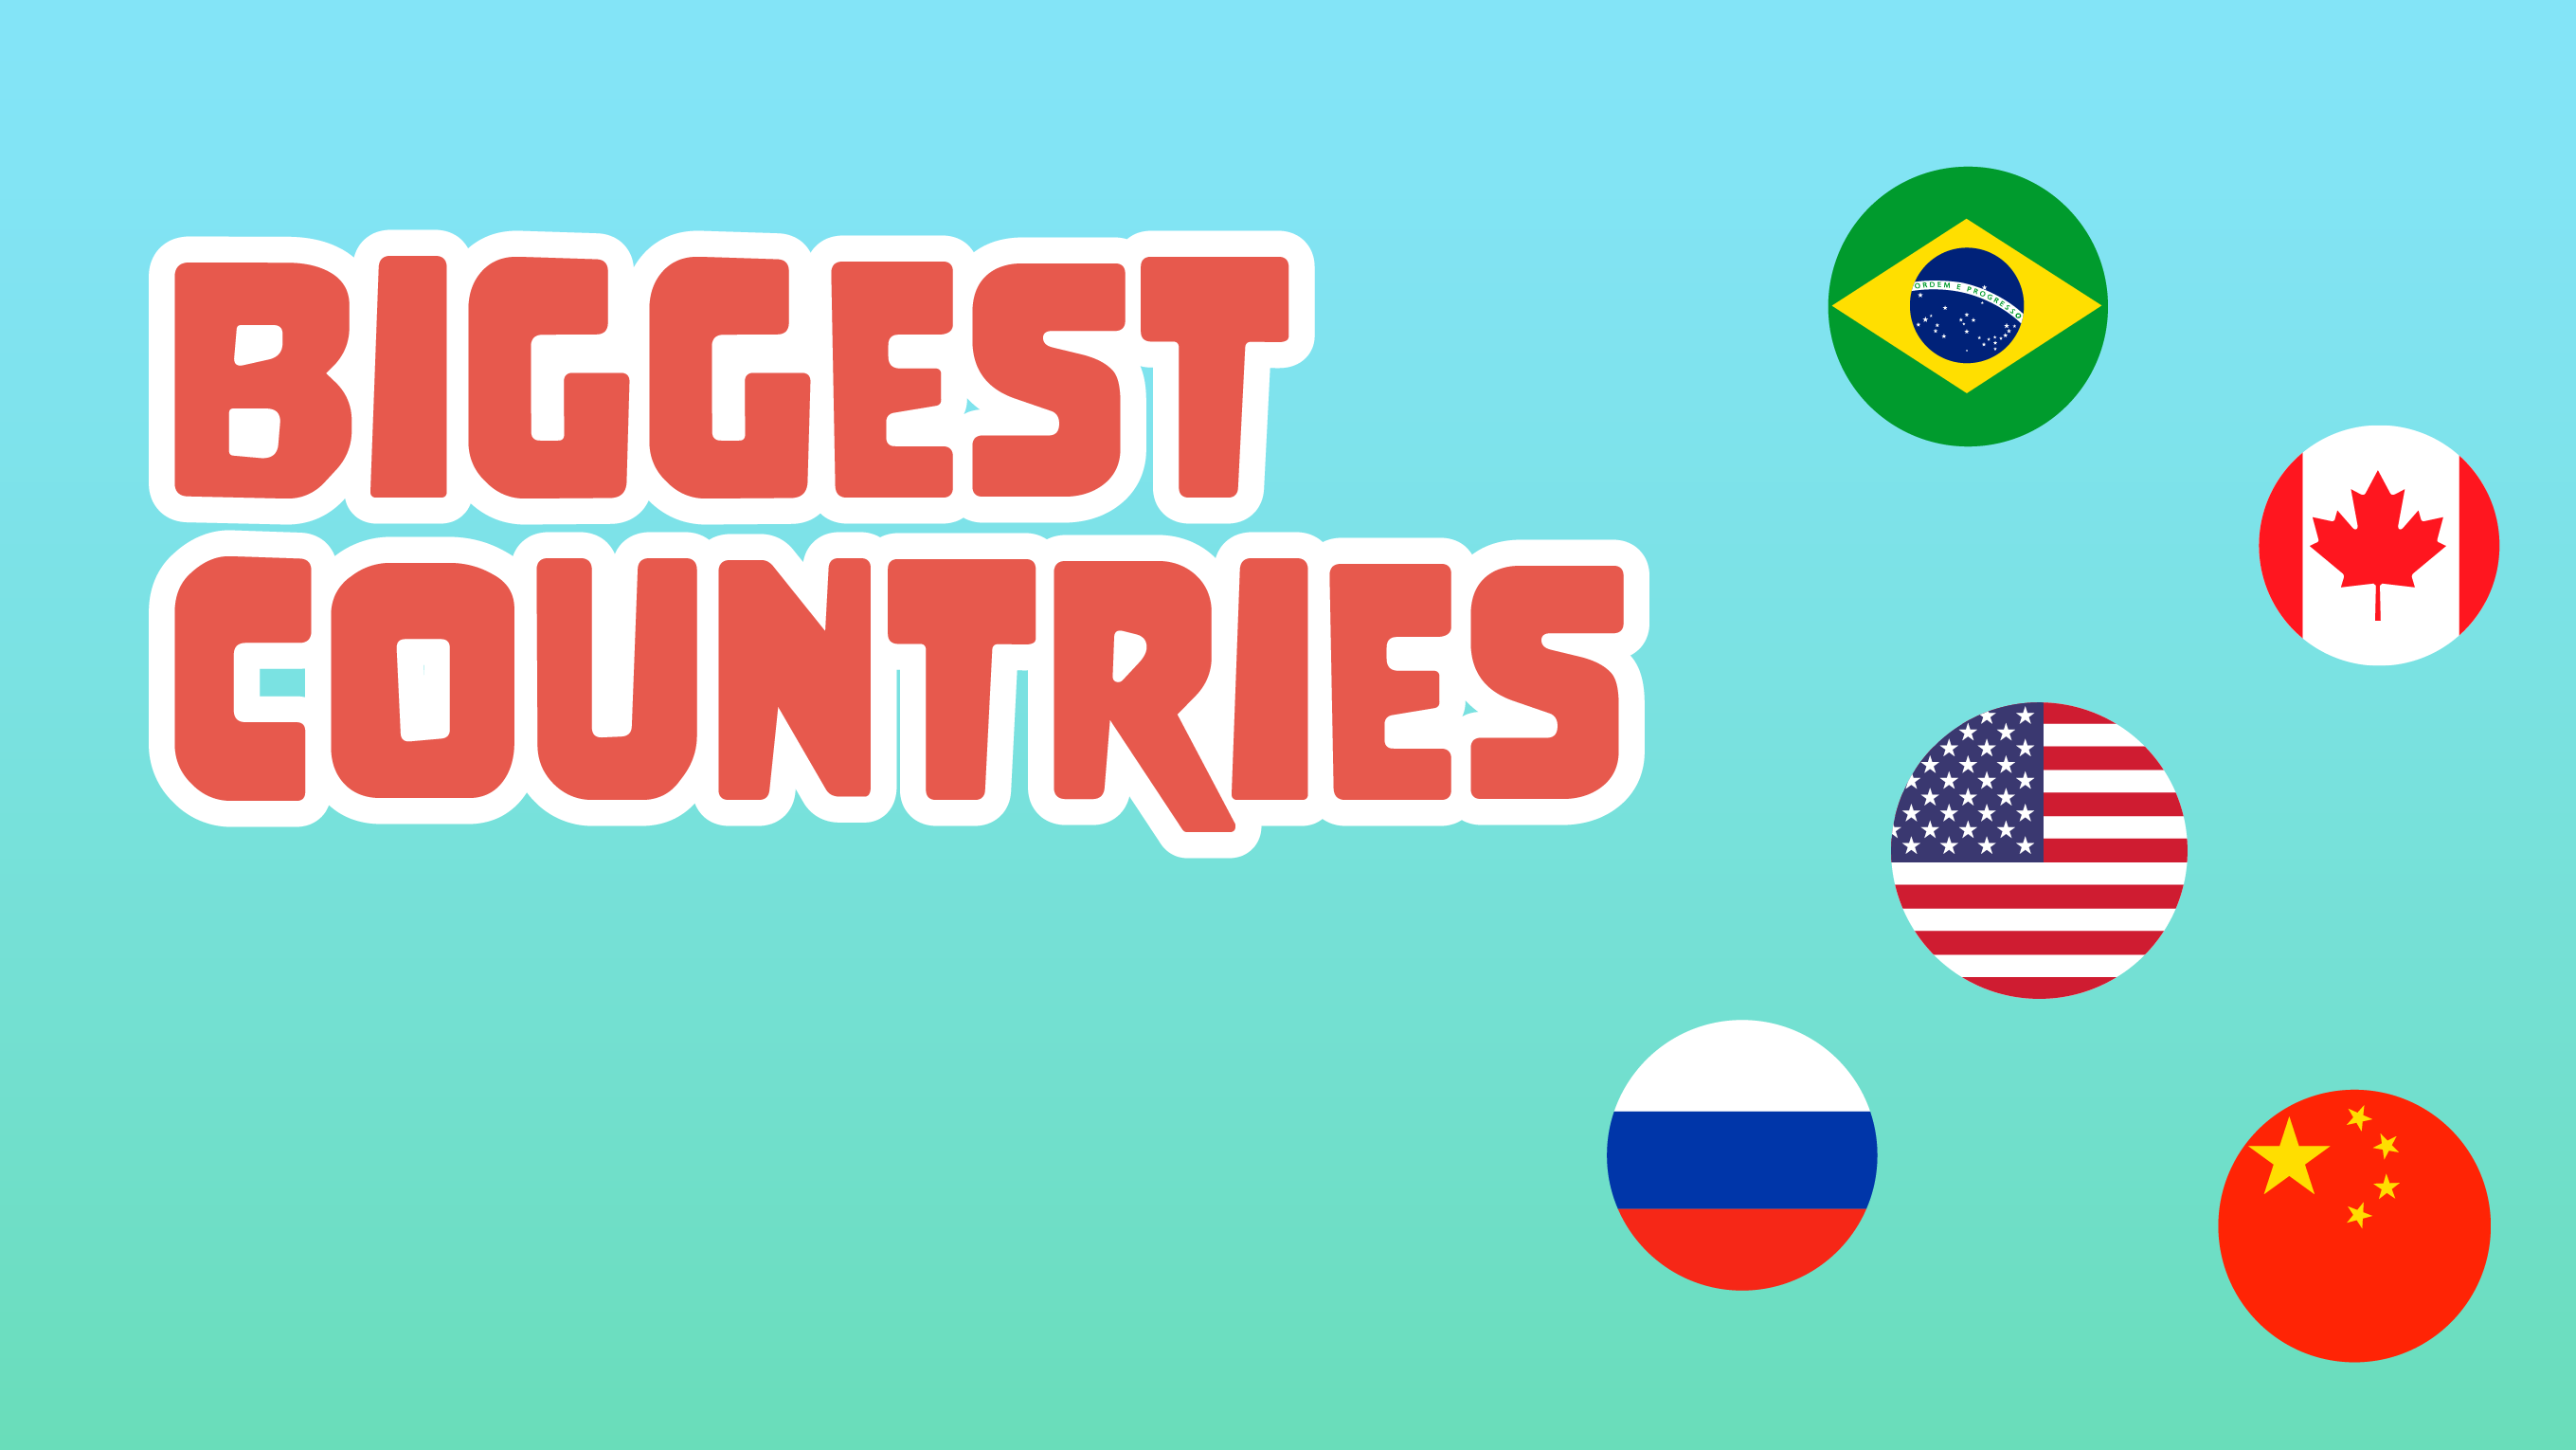 Biggest Countries